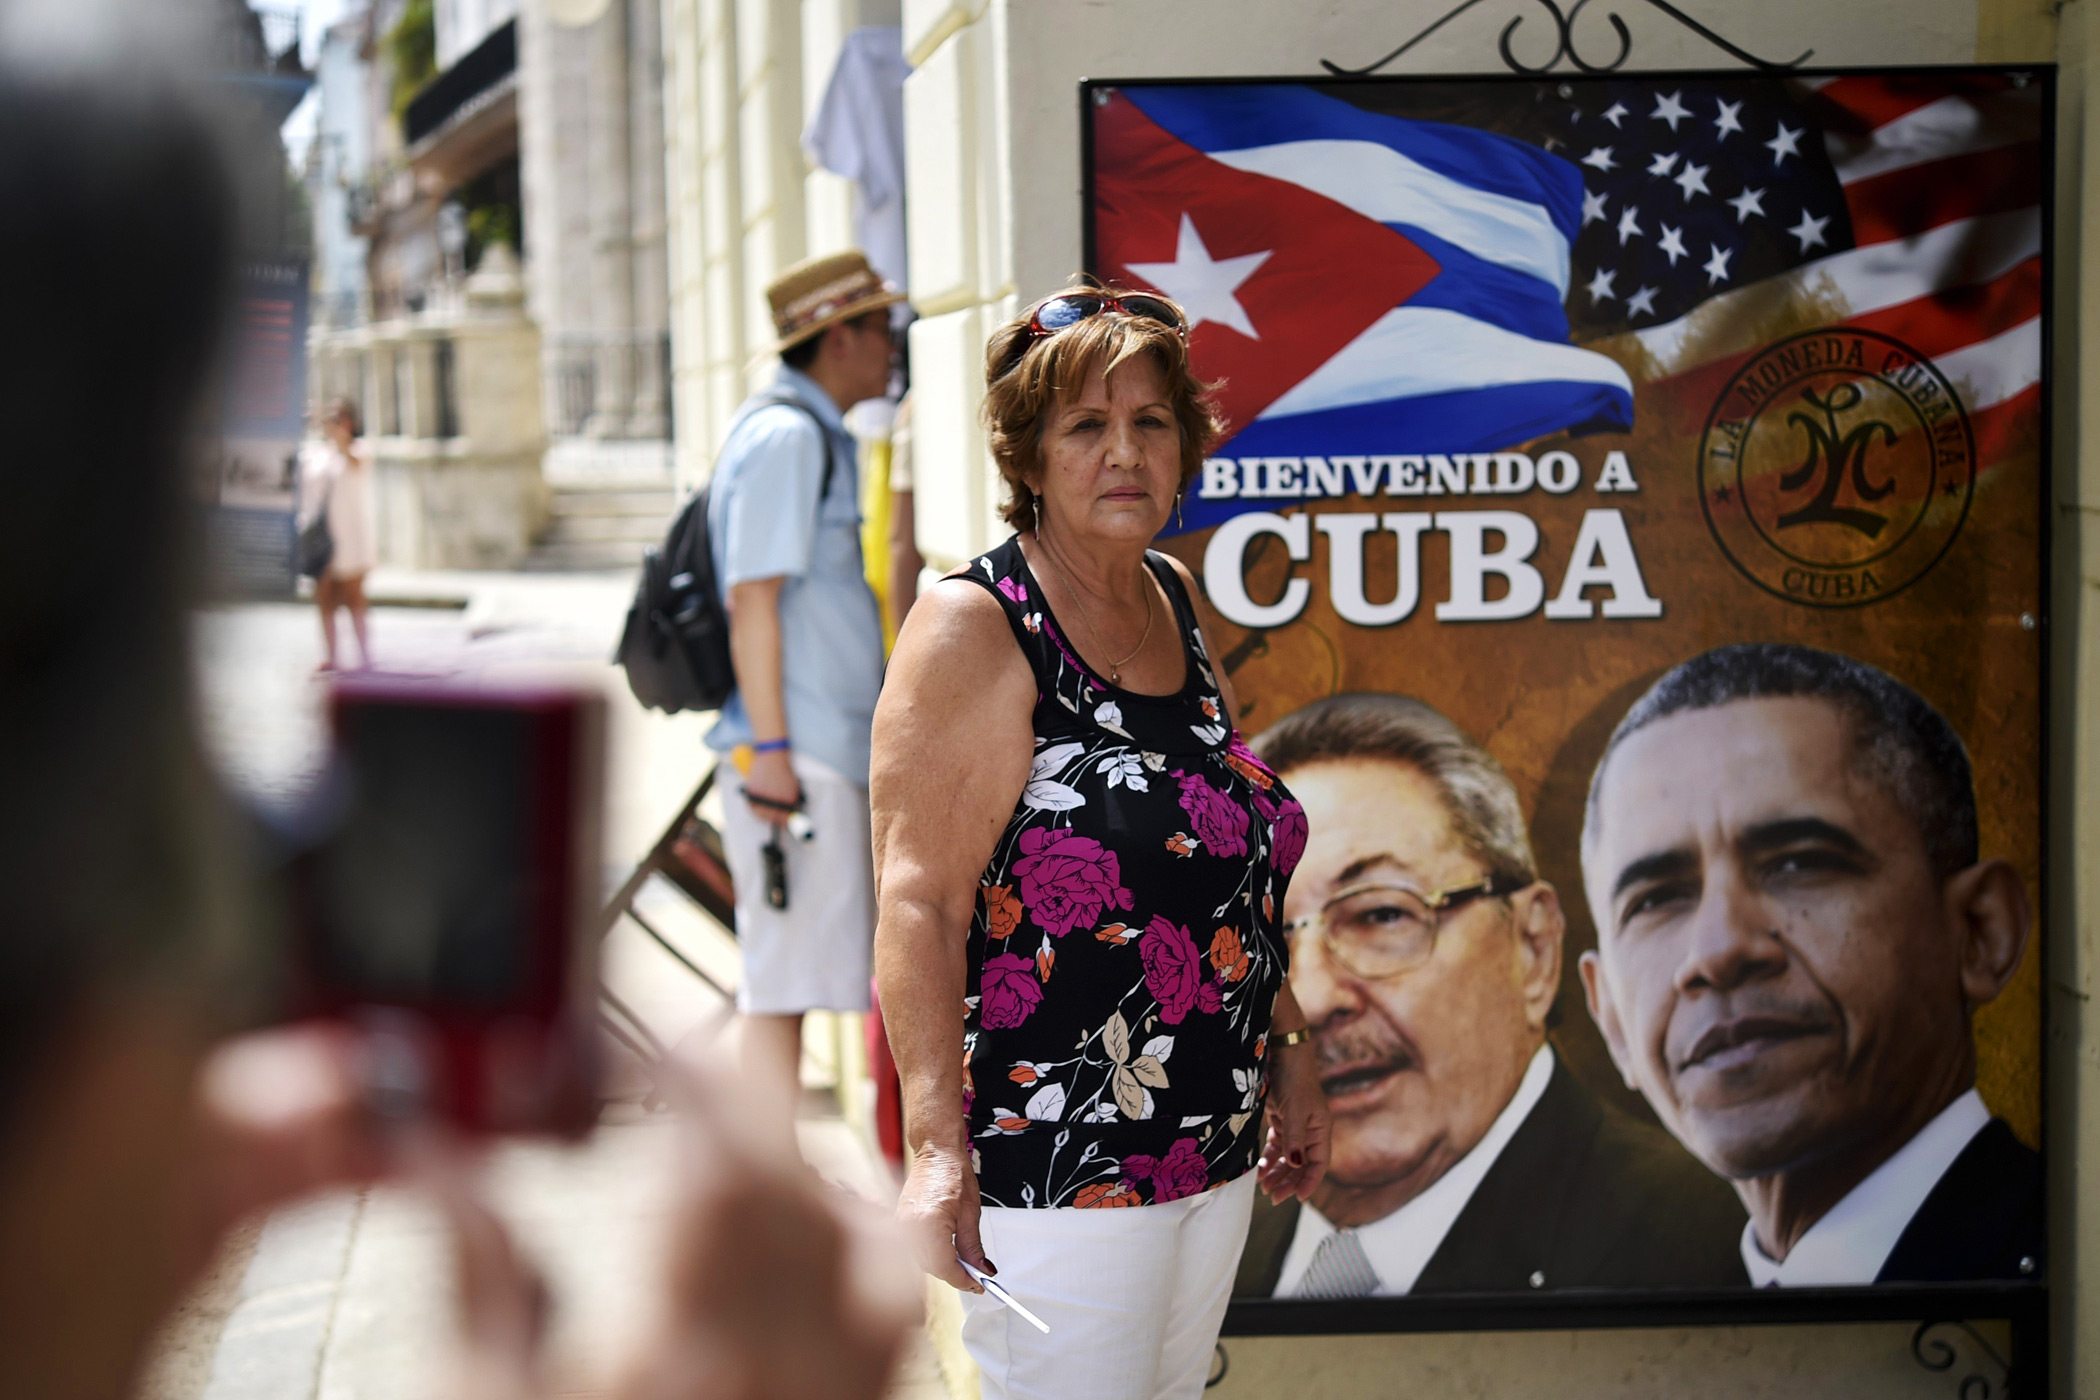 A Cuban woman poses for a picture with a sign displaying images of Cuban and U.S. Presidents Raul Castro and Barack Obama in Havana on March 19, 2016.